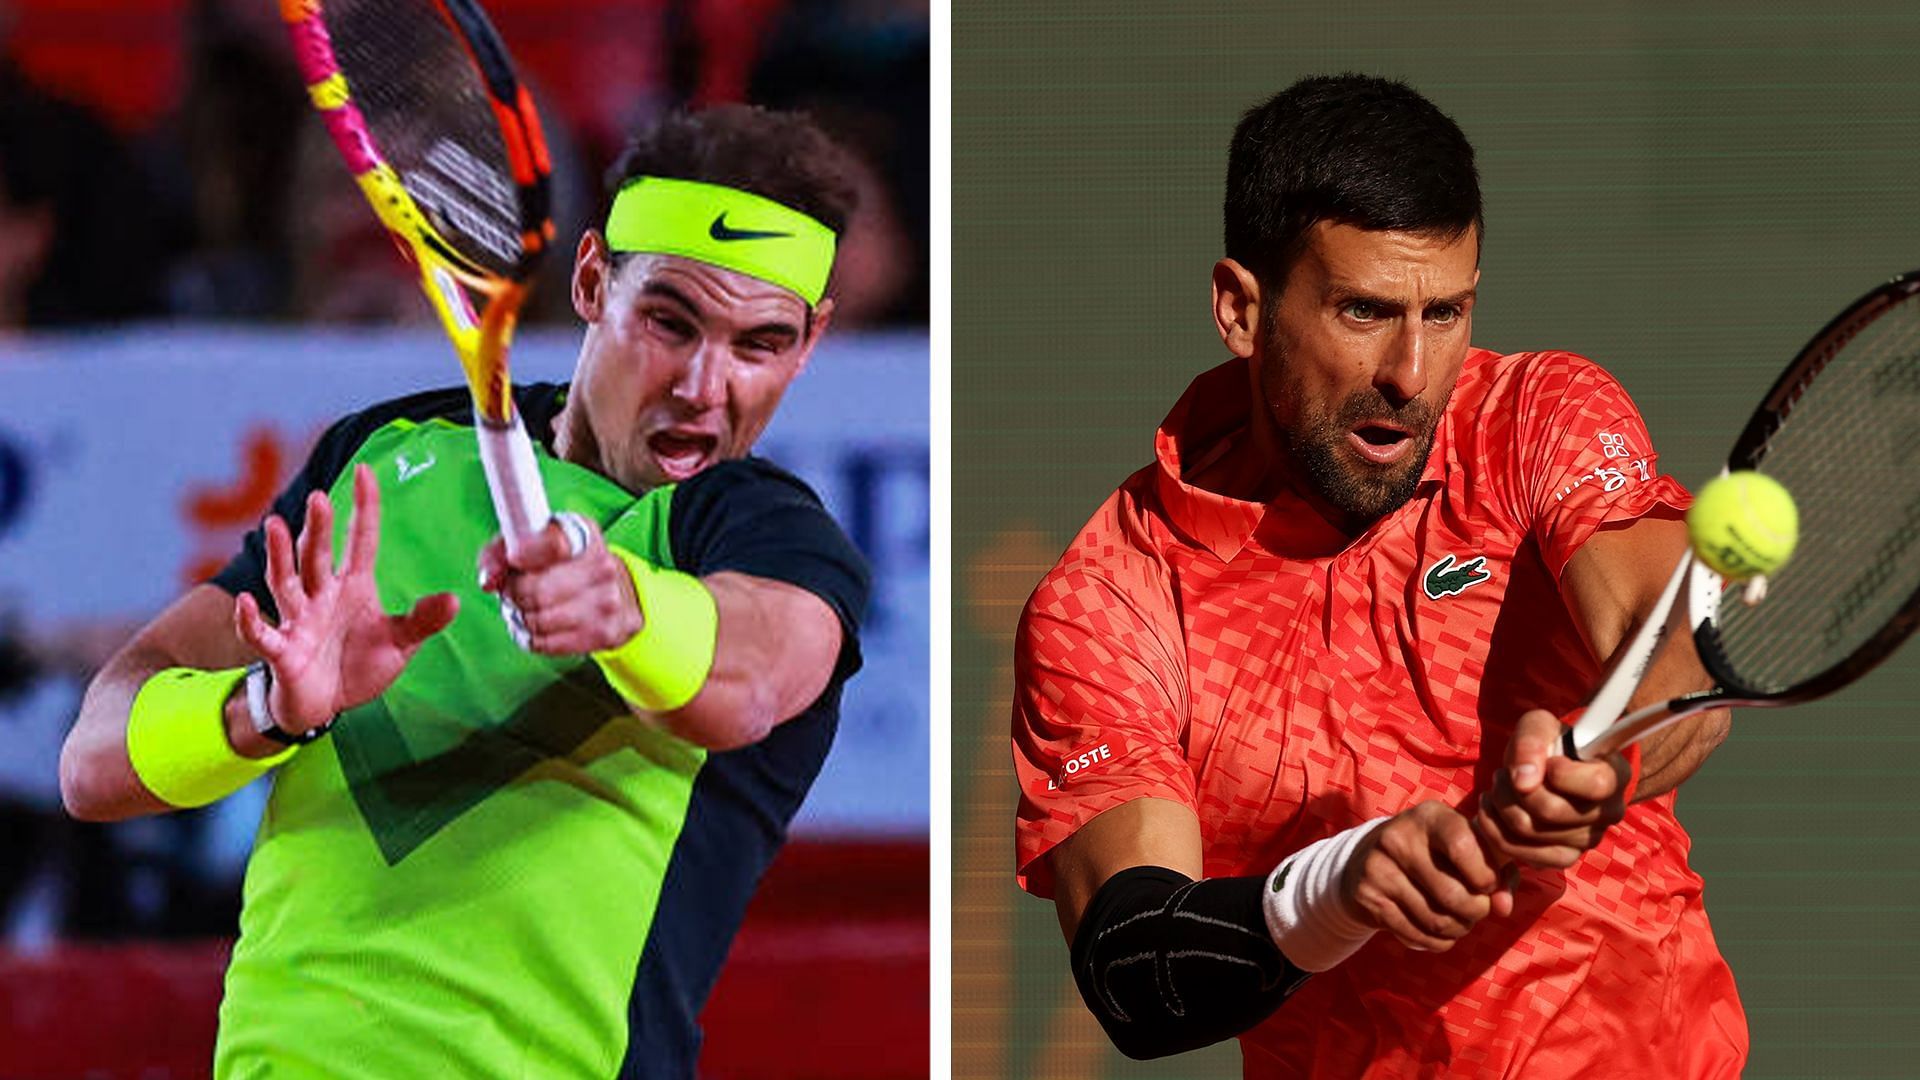 Rafael Nadal & Novak Djokovic news: What to expect from the duo this week? | April 15-21